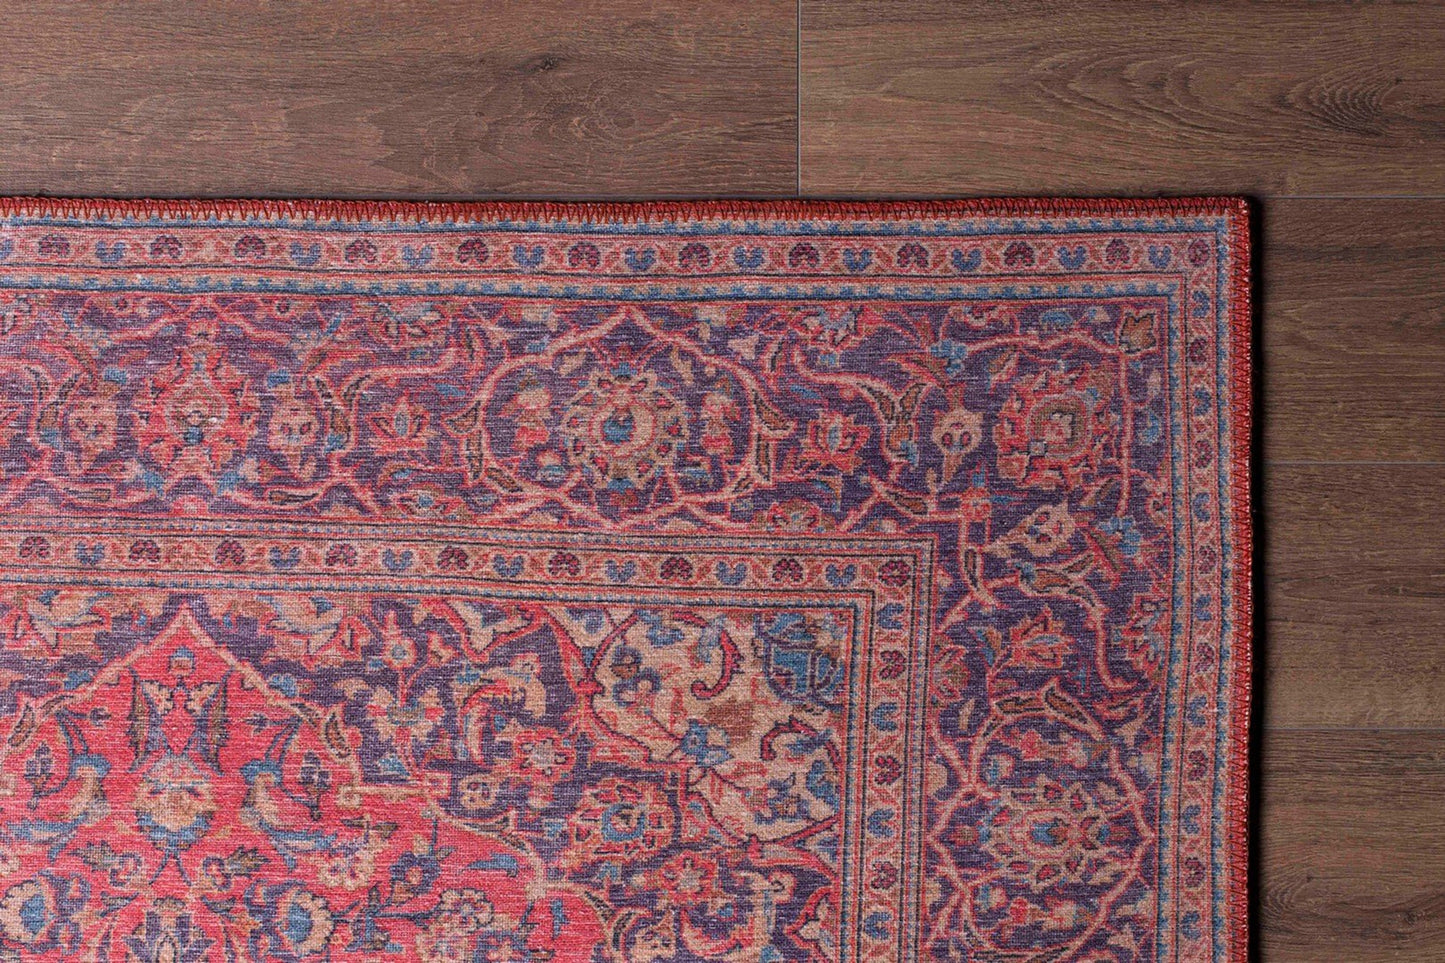 SURA | Oriental Rug, Persian Pattern, Vintage Handmade looks, Bohemian, Home decor, Floral Medallion, Bordered, Unique Red Carpet, Fame Rugs